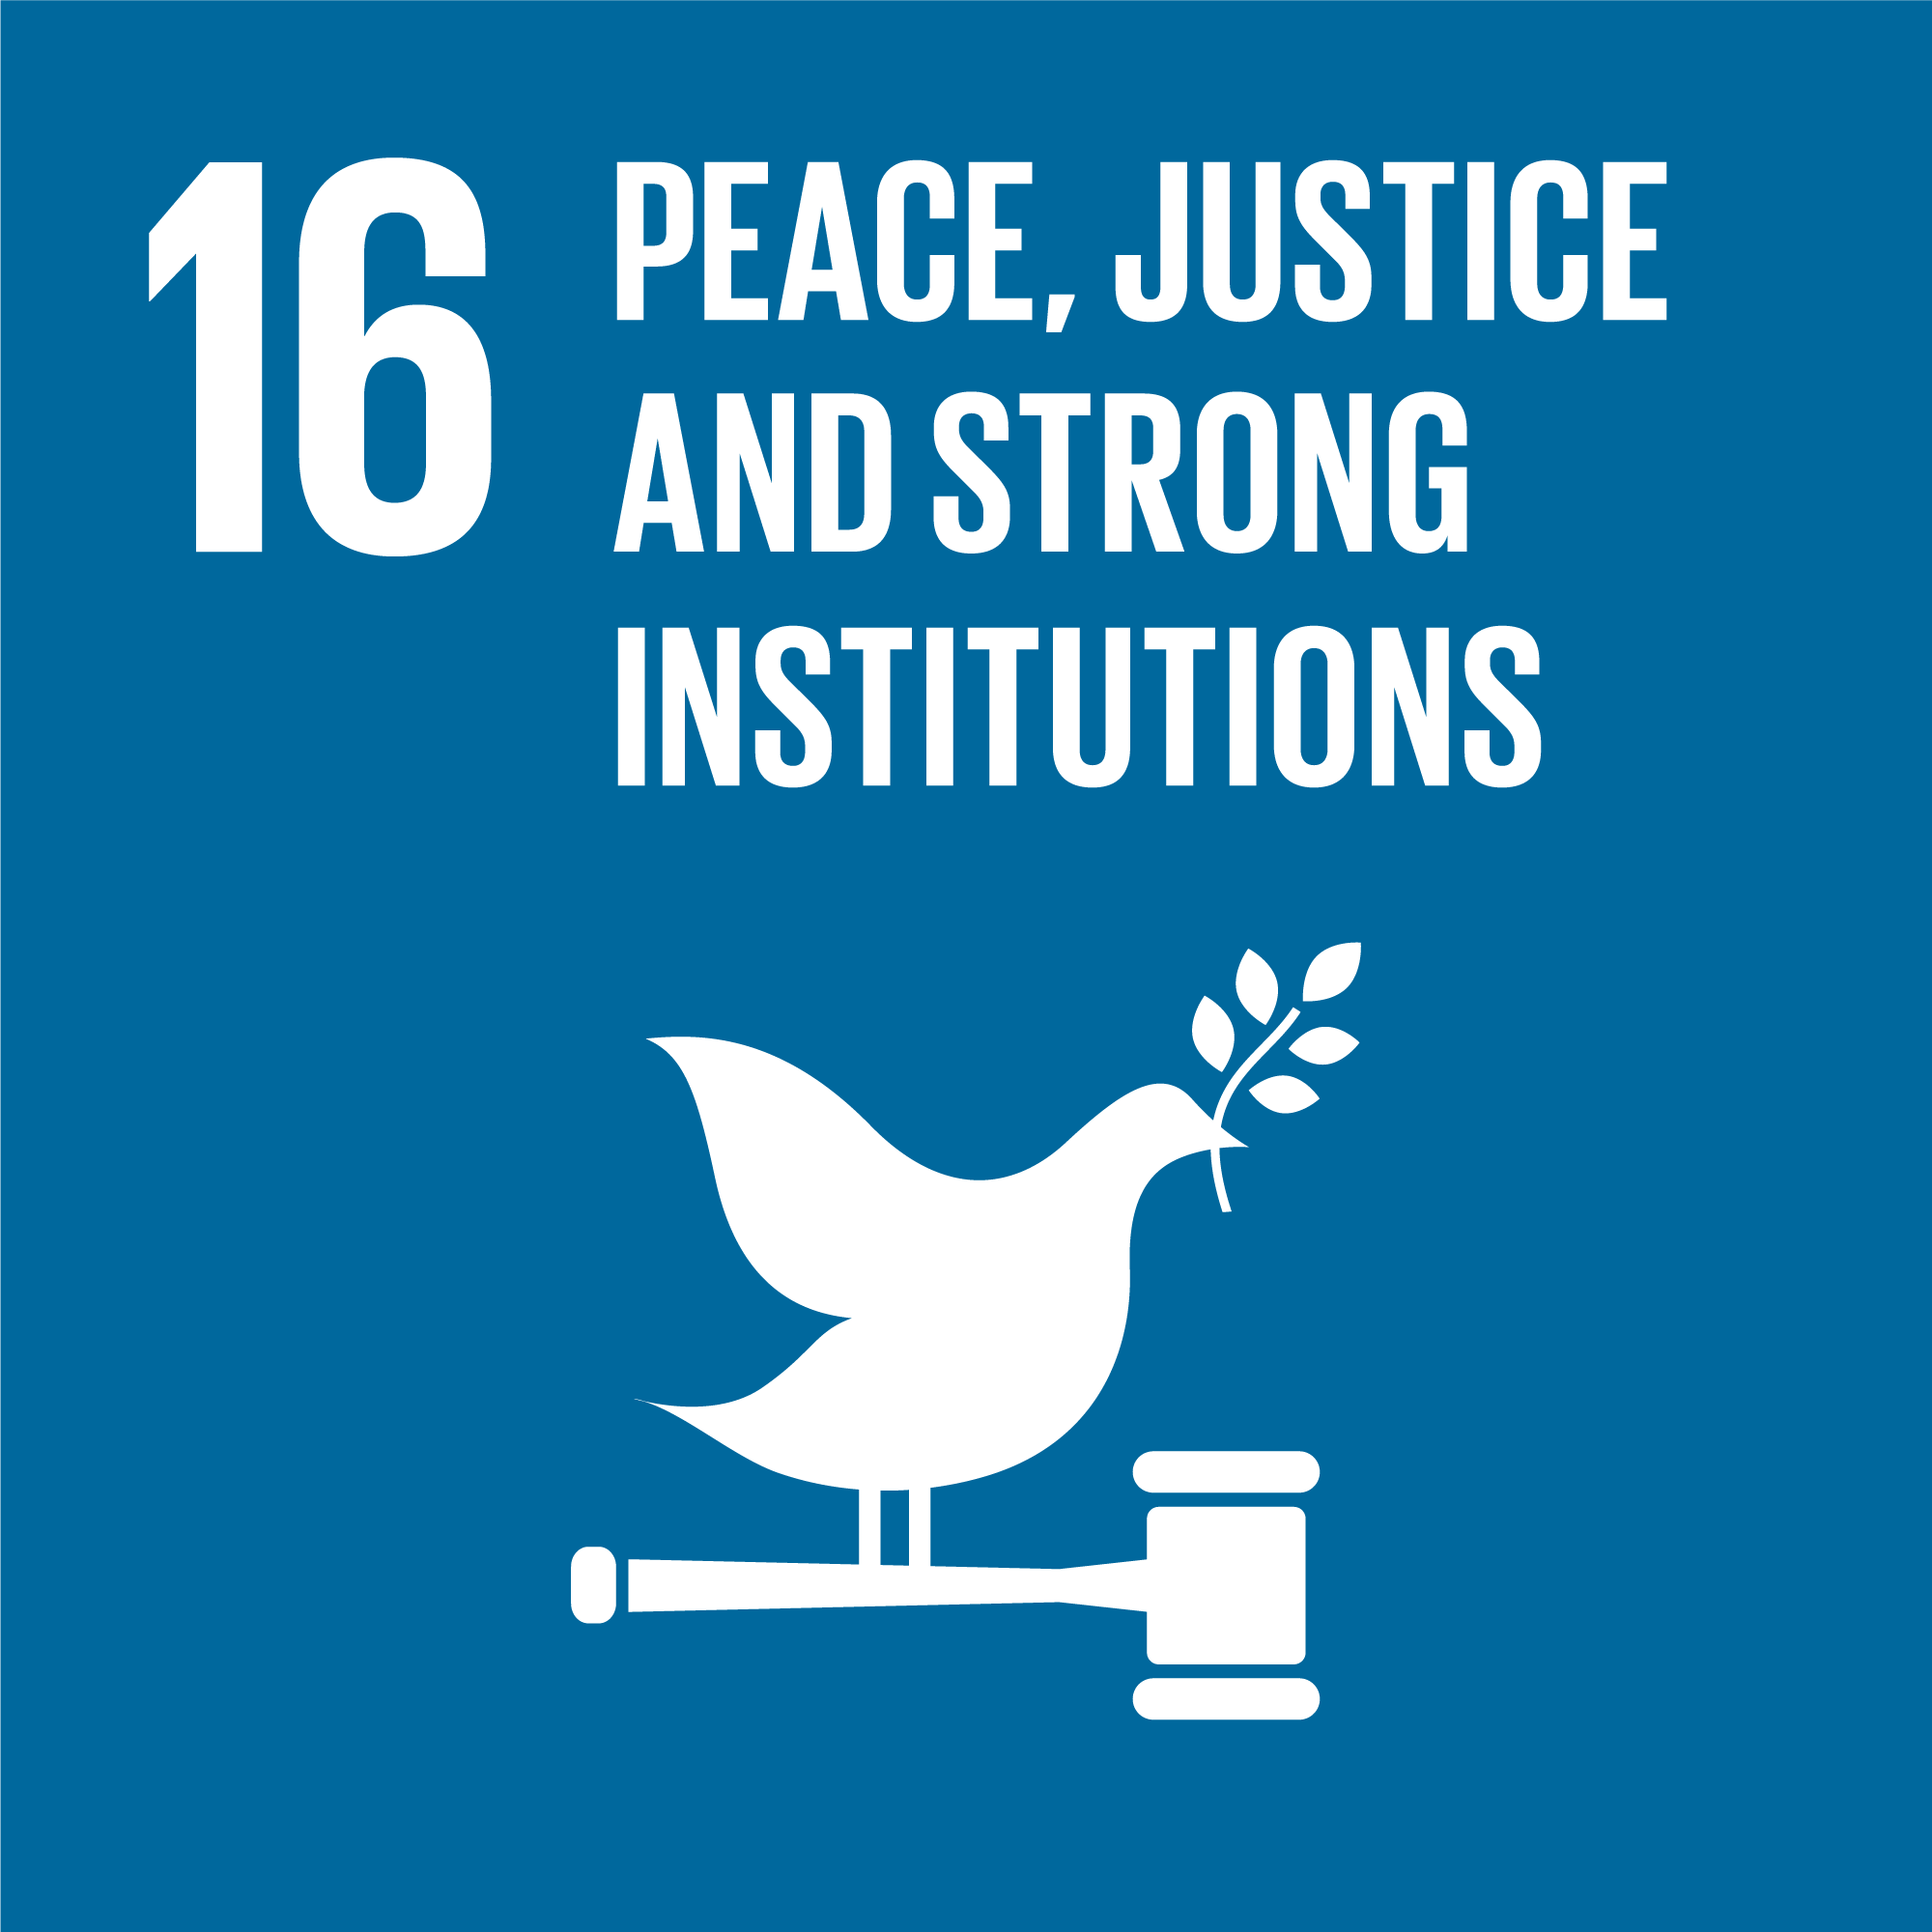 SDG 16: Peace, justice and strong institutions